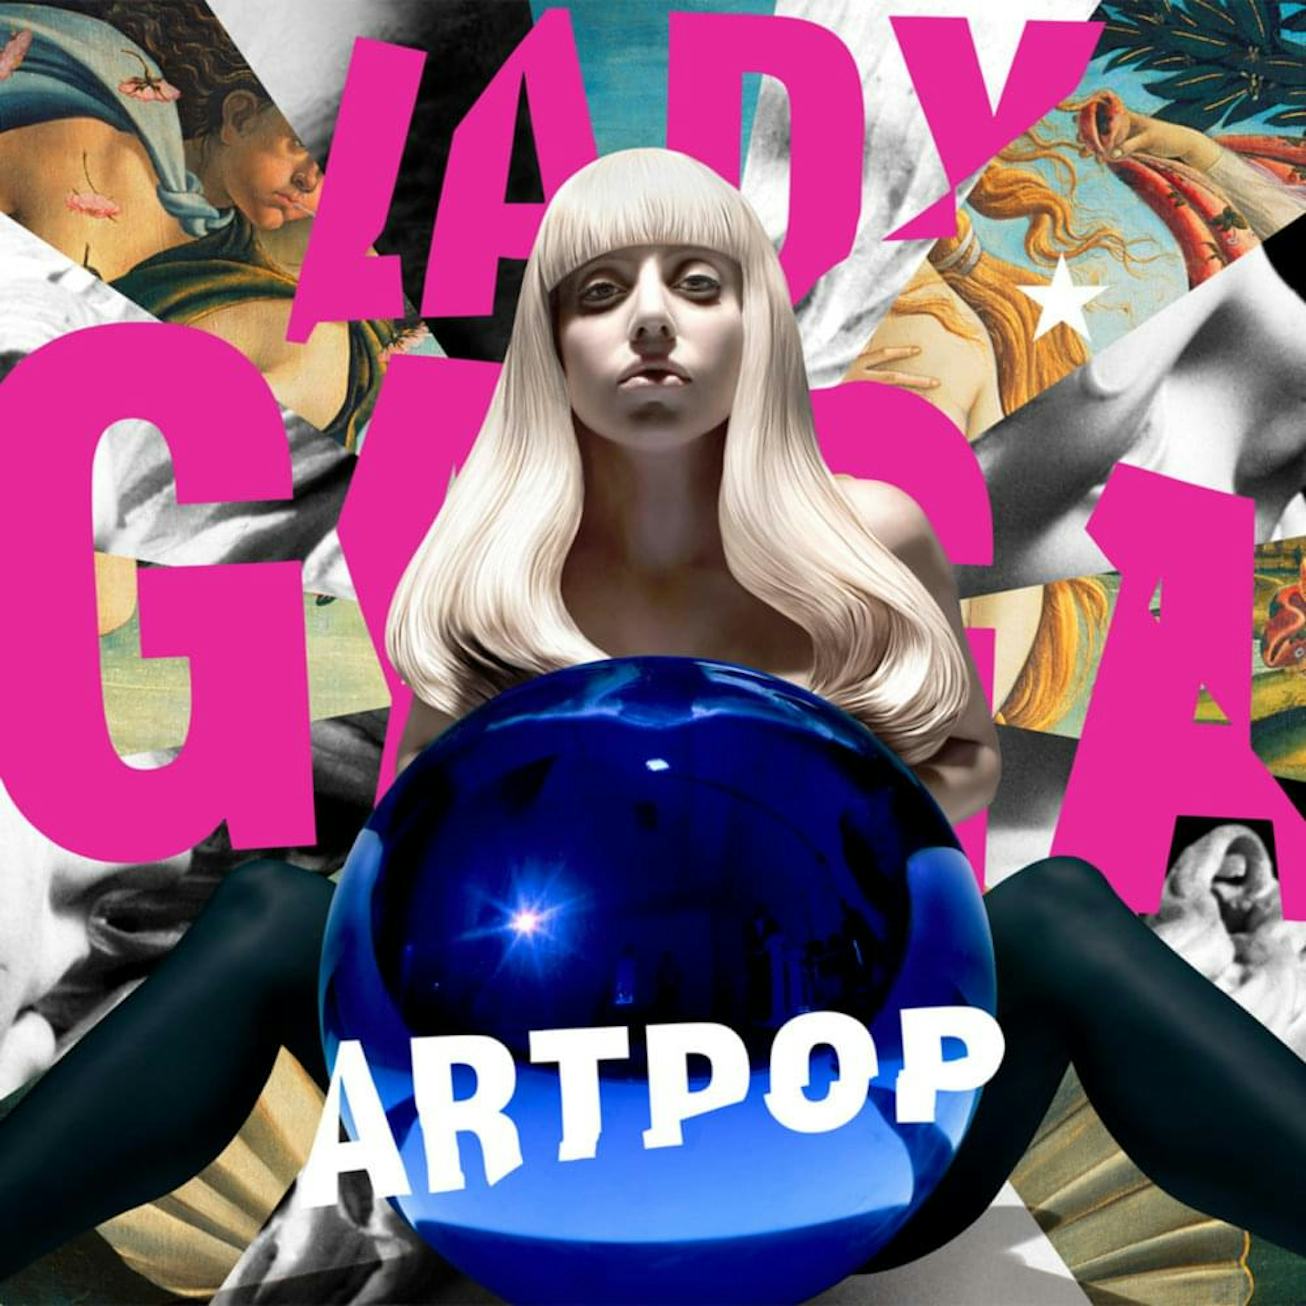 Lady Gaga's ARTPOP is back on the charts after fans started an online petition.